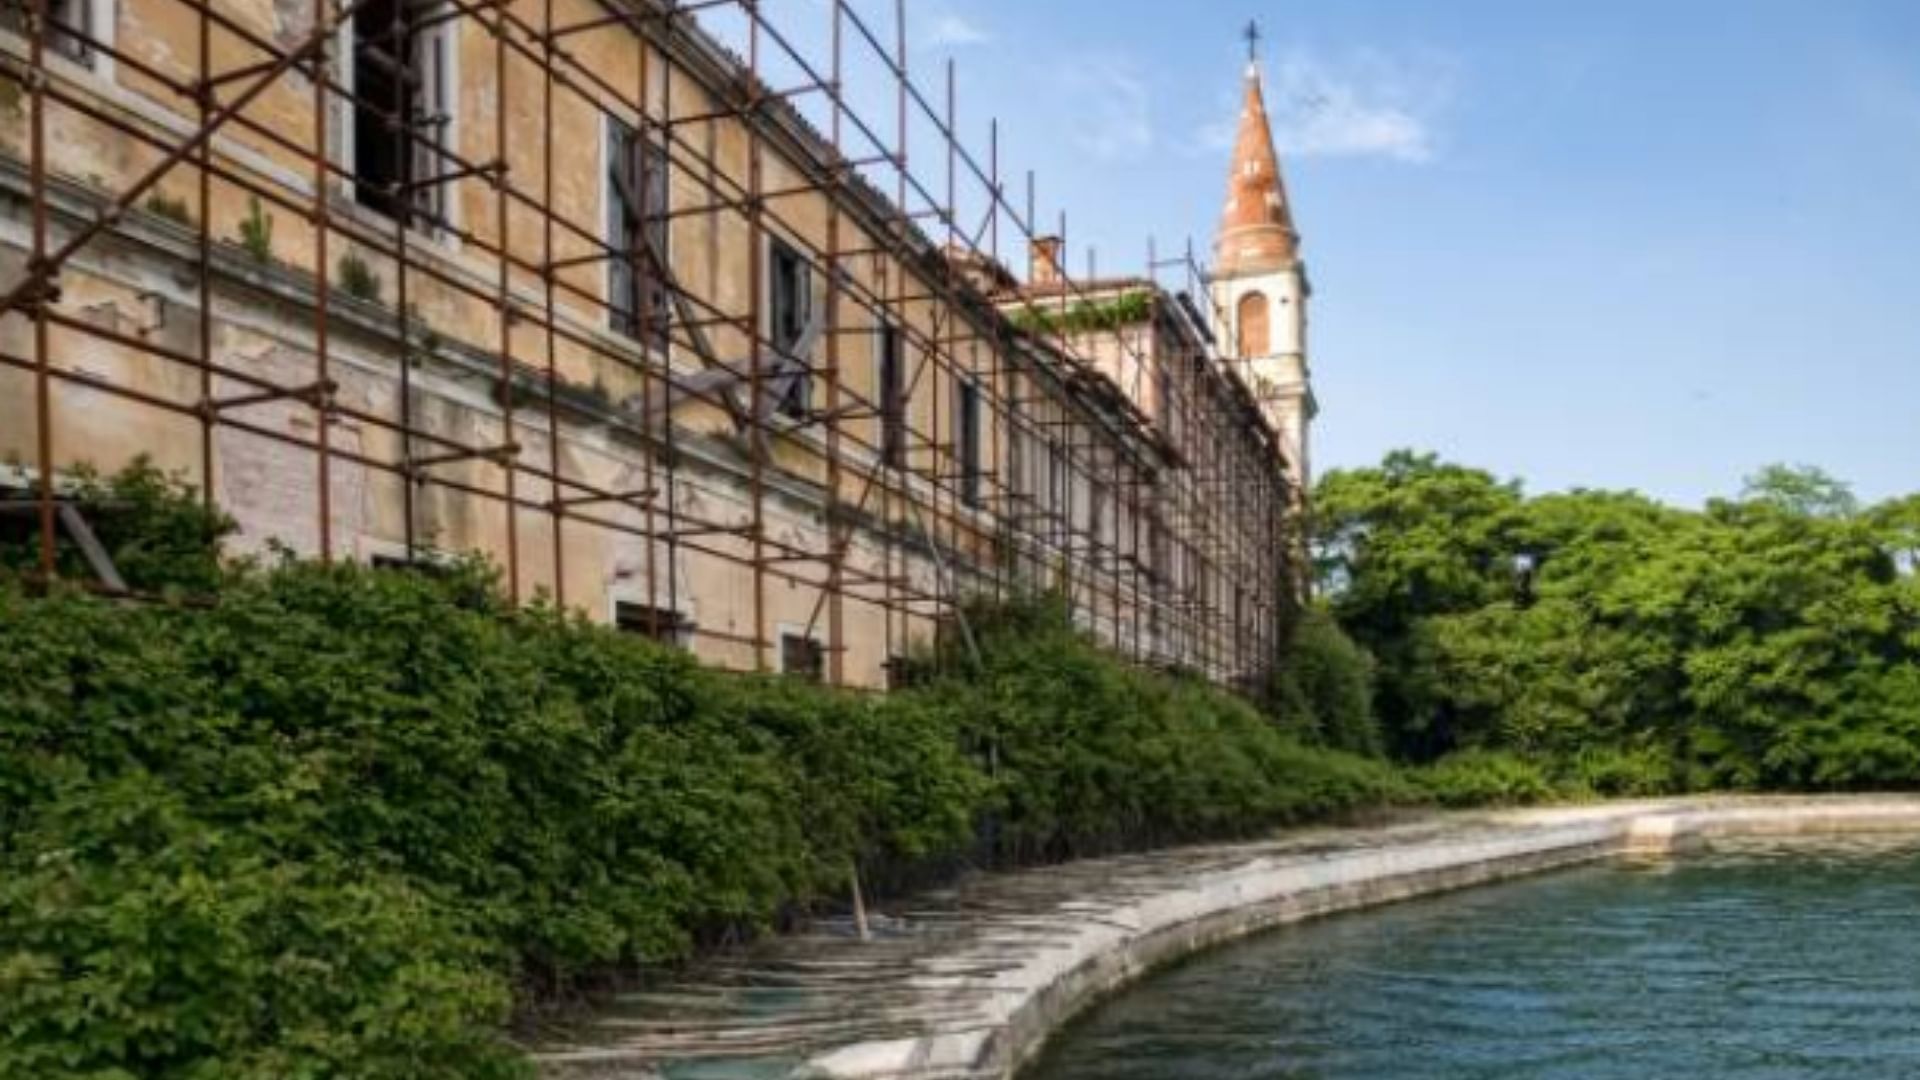 World’s Most Haunted Place Poveglia island from italy haunted island where people never go